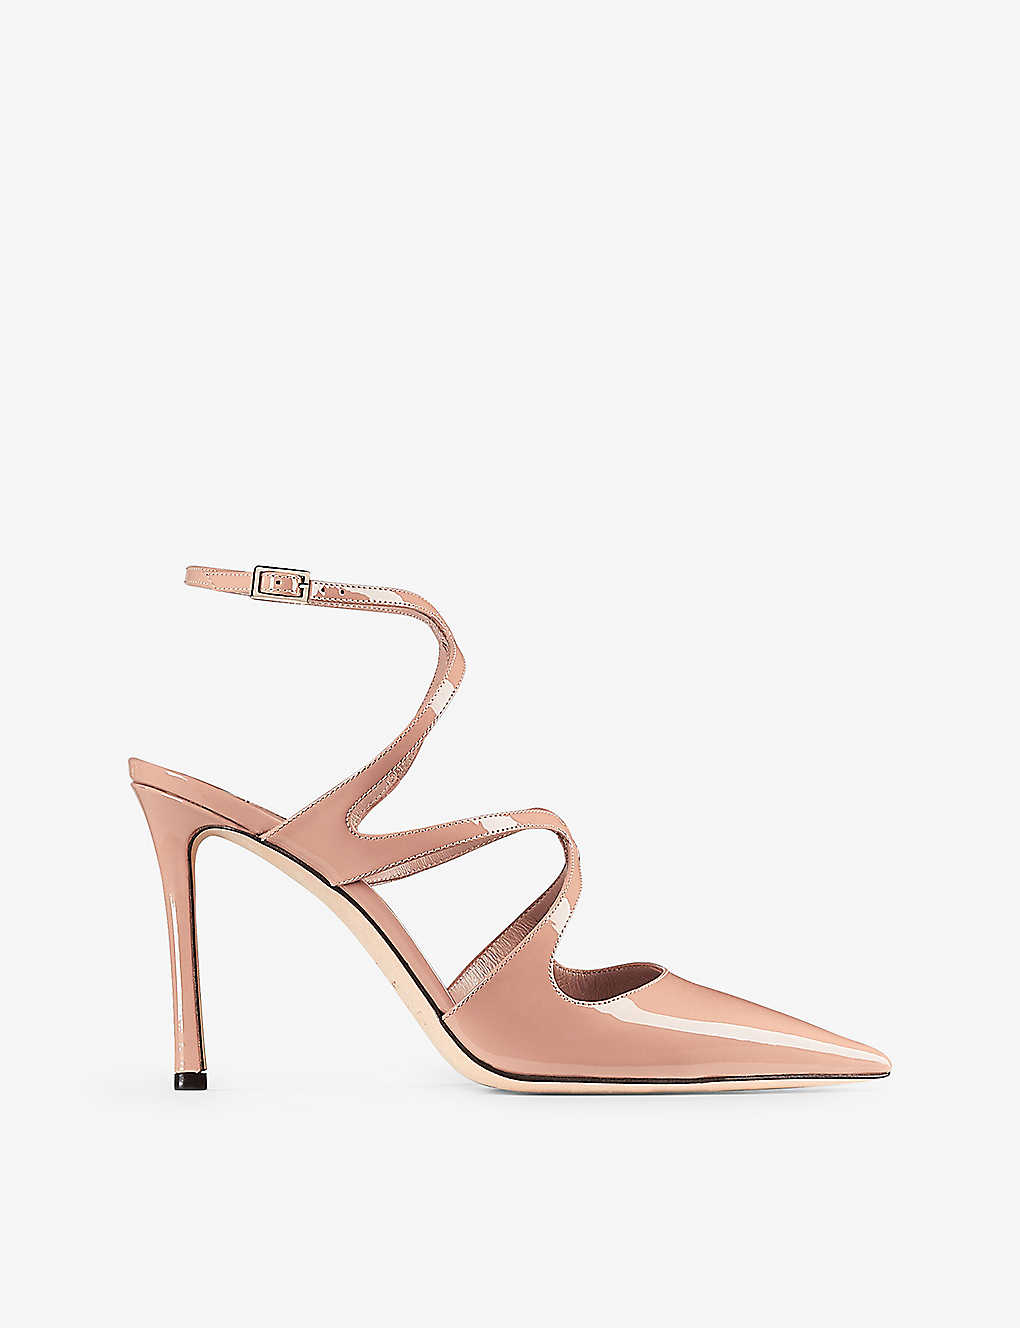 Shop Jimmy Choo Women's Ballet Pink Azia 95 Point-toe Patent-leather Heeled Pumps